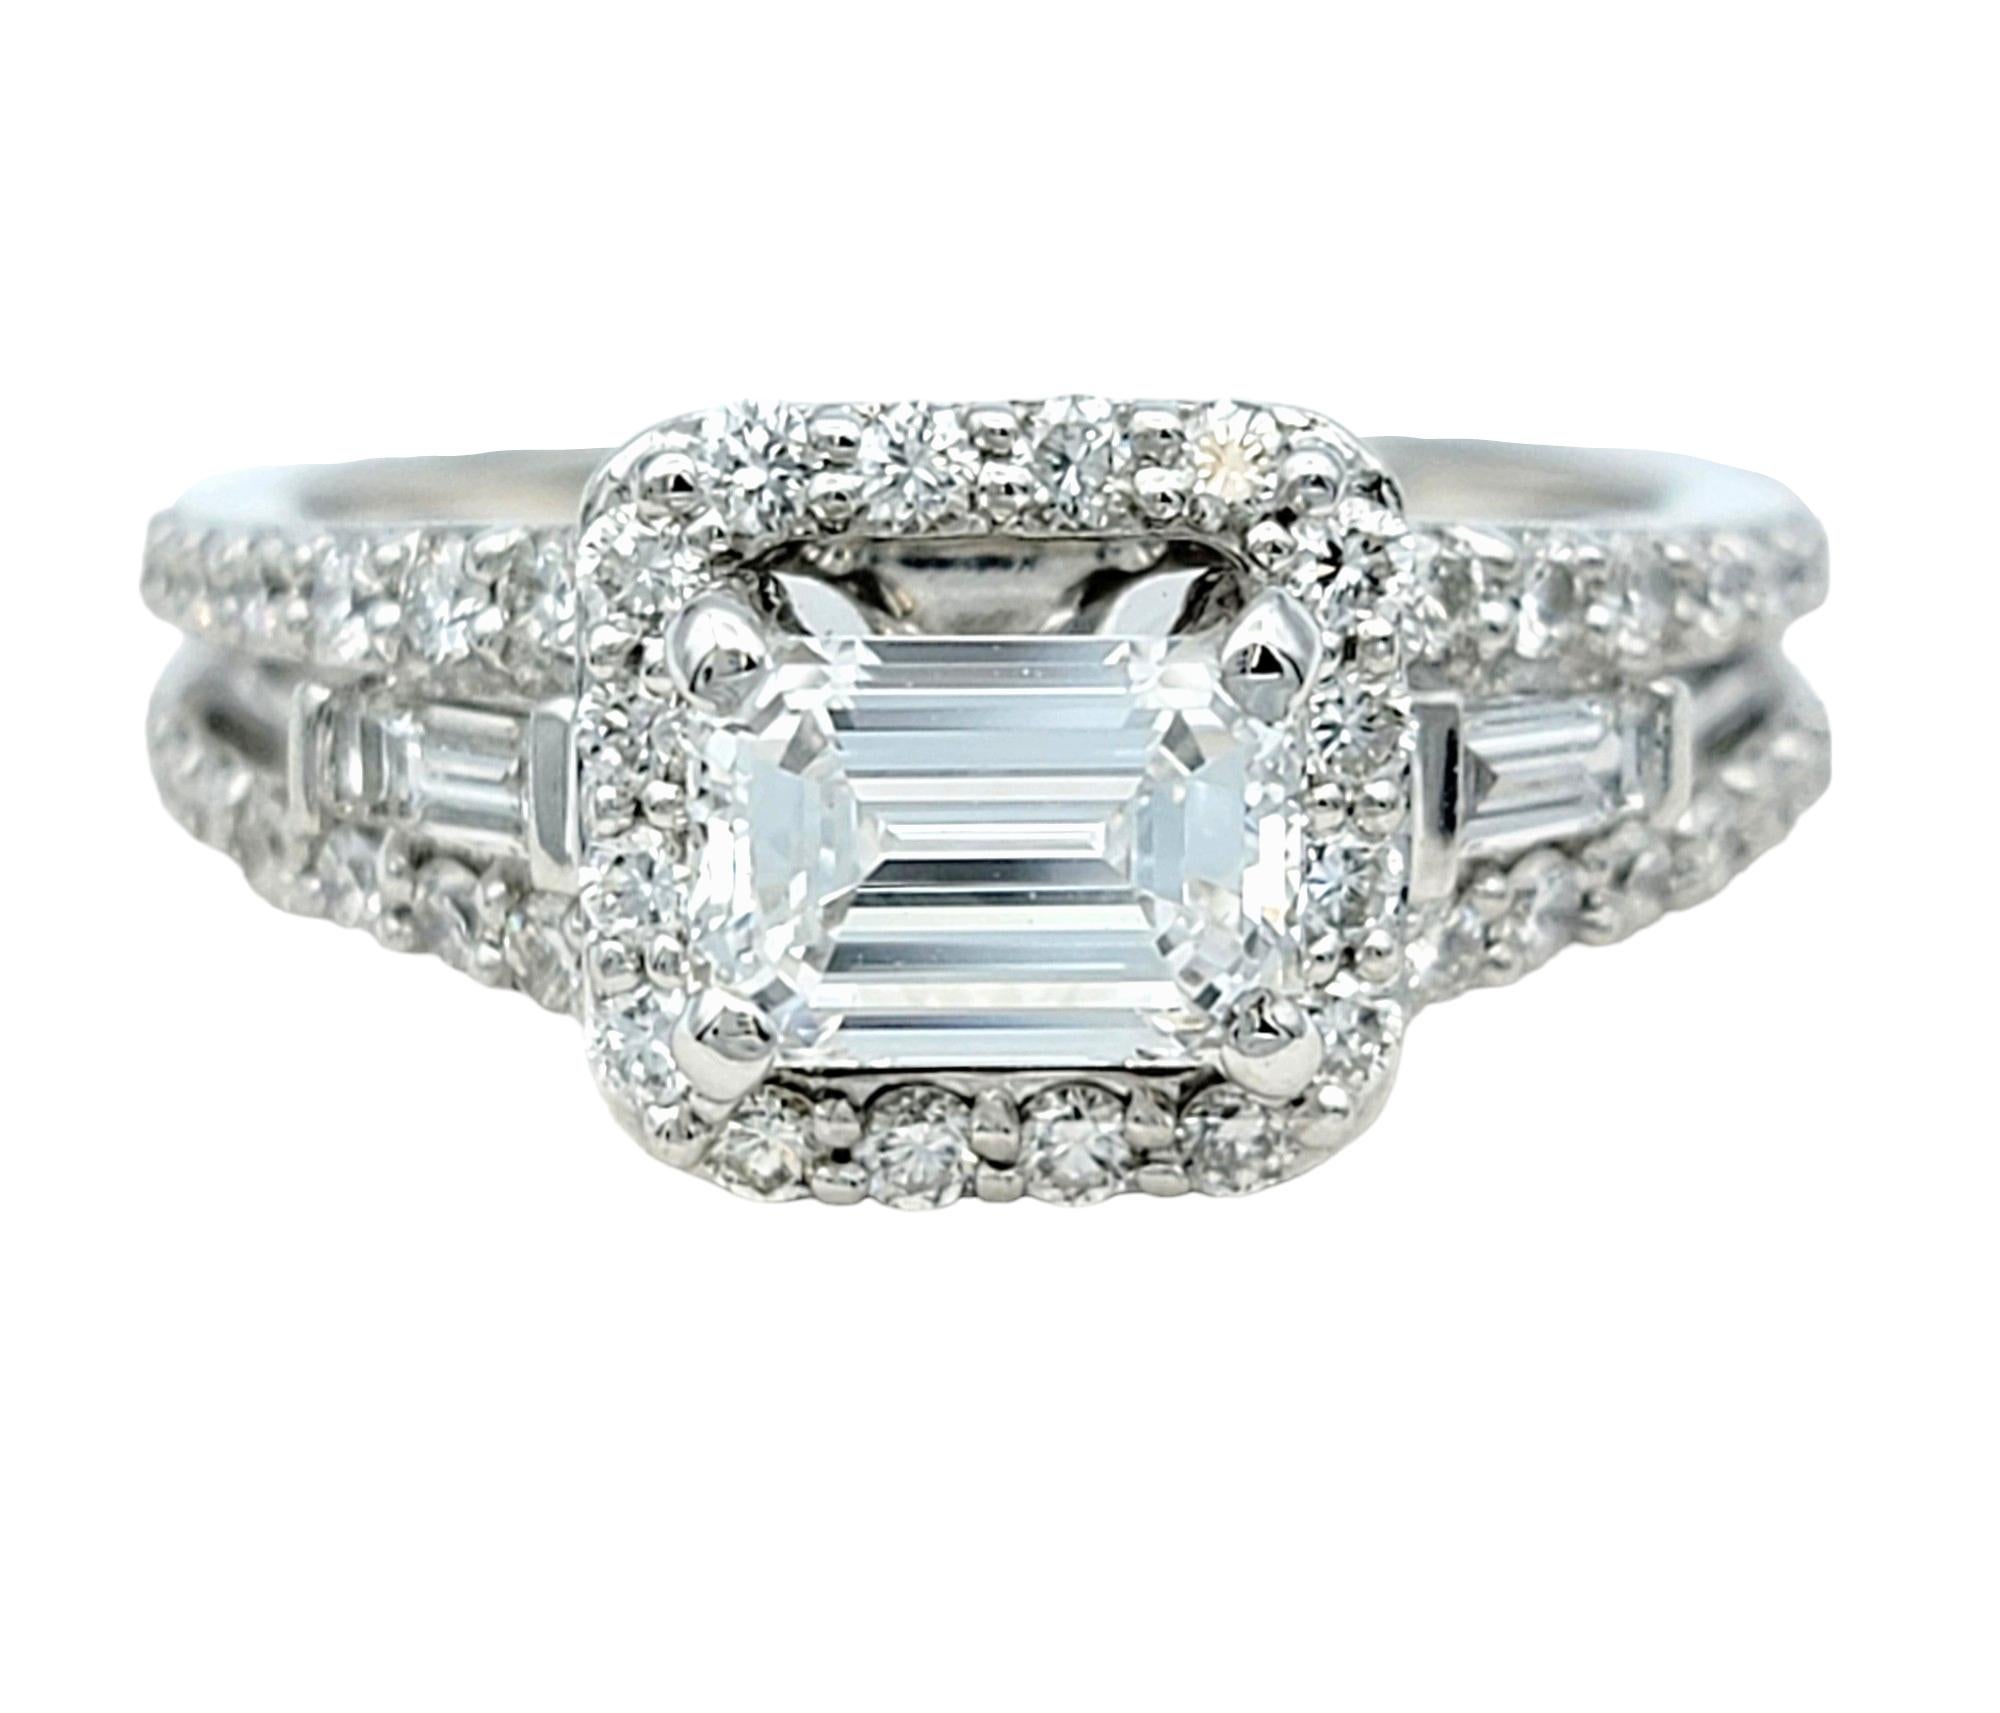 Contemporary Emerald Cut Diamond and Squared Halo Engagement Ring White Gold, D-E / VVS1-VVS2 For Sale